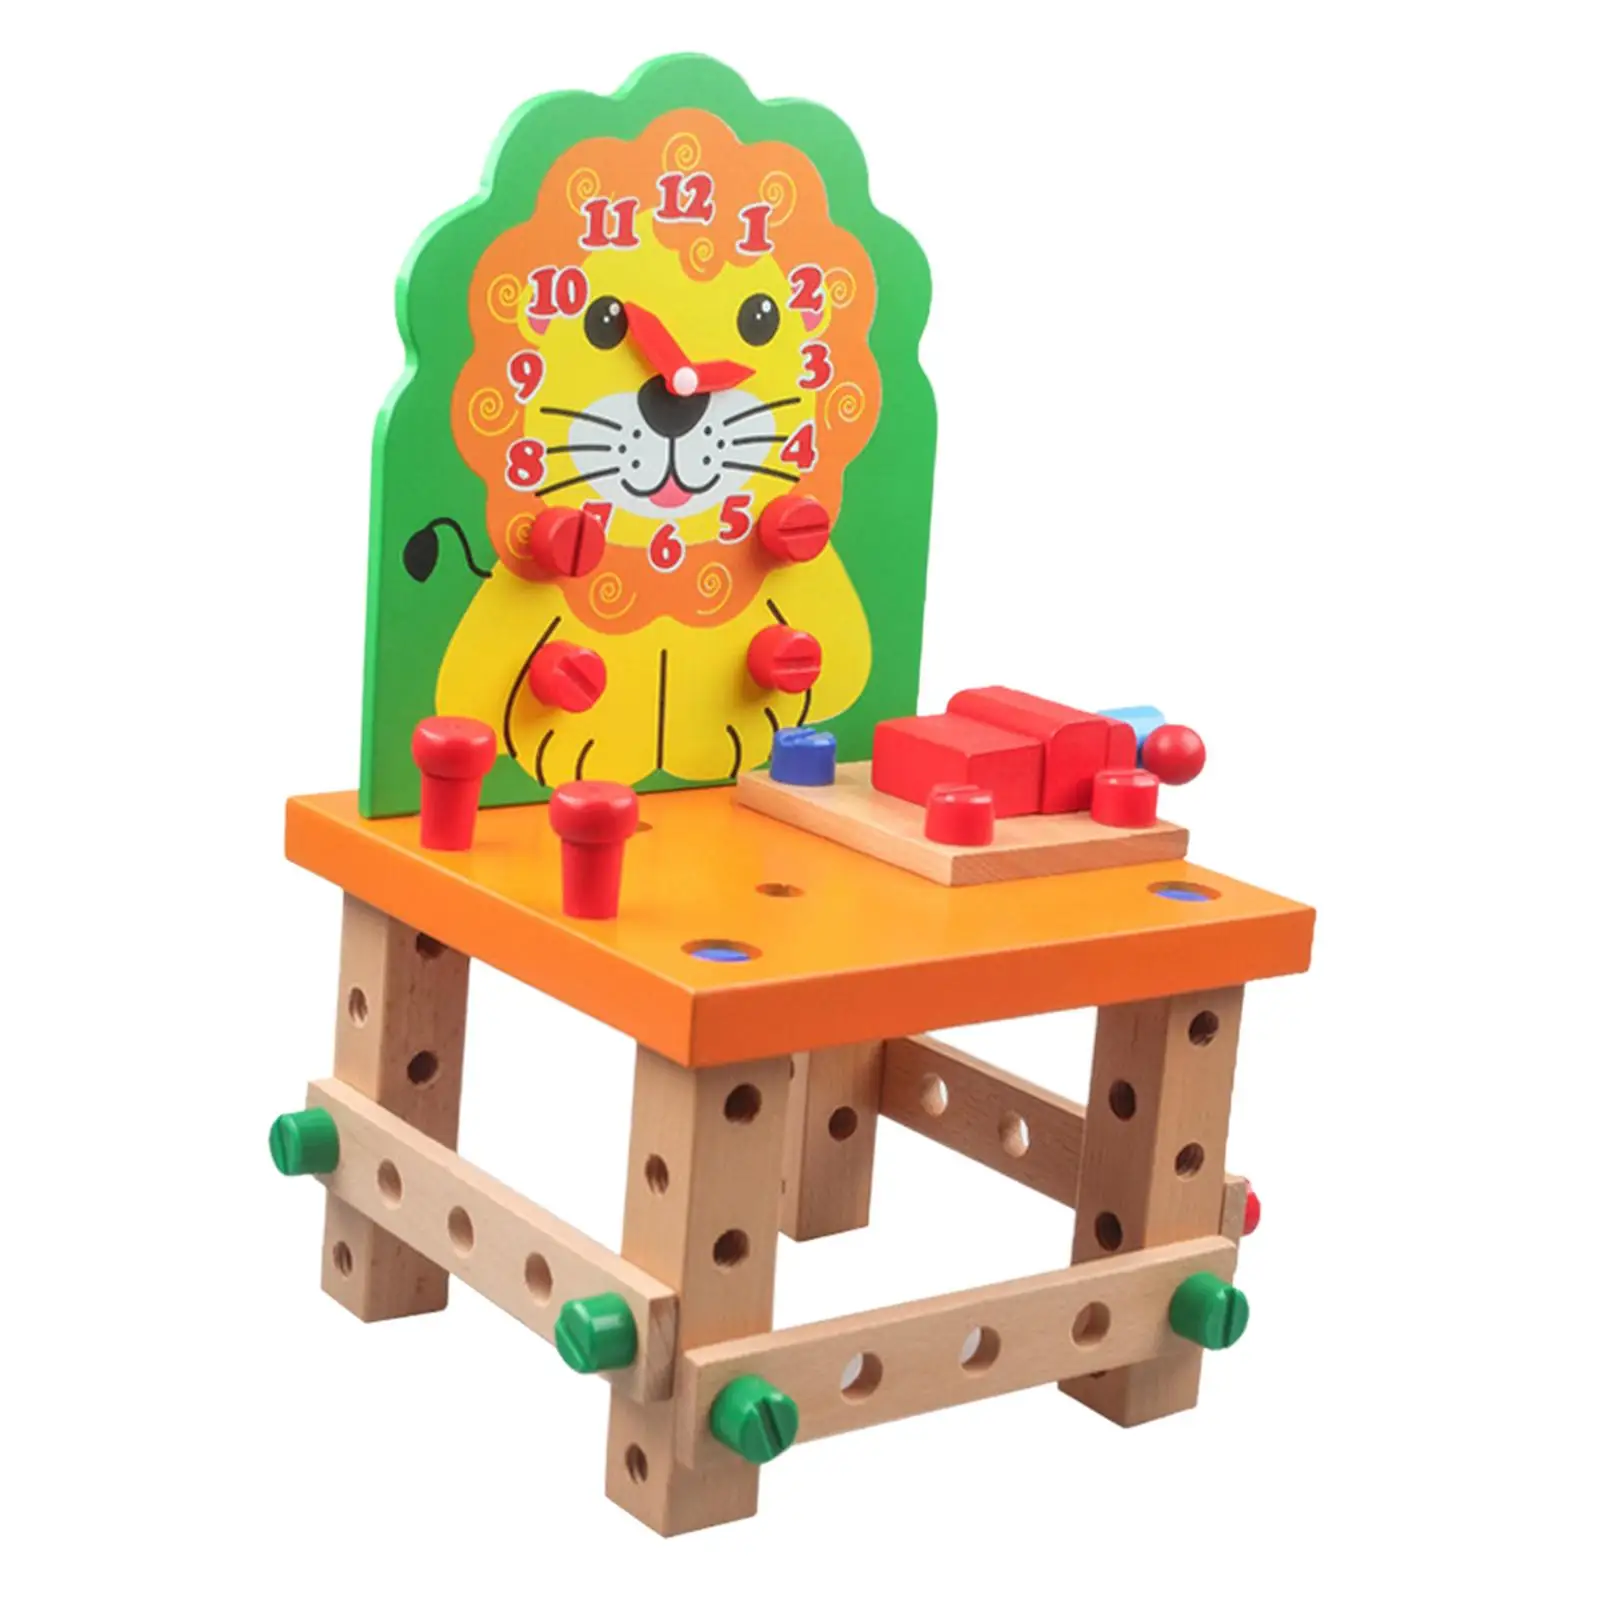 Wooden Chair Models Construction Play Set Nuts and Bolts Toy with Tools Kids Wooden Project Woodworking Kit for Children Gifts